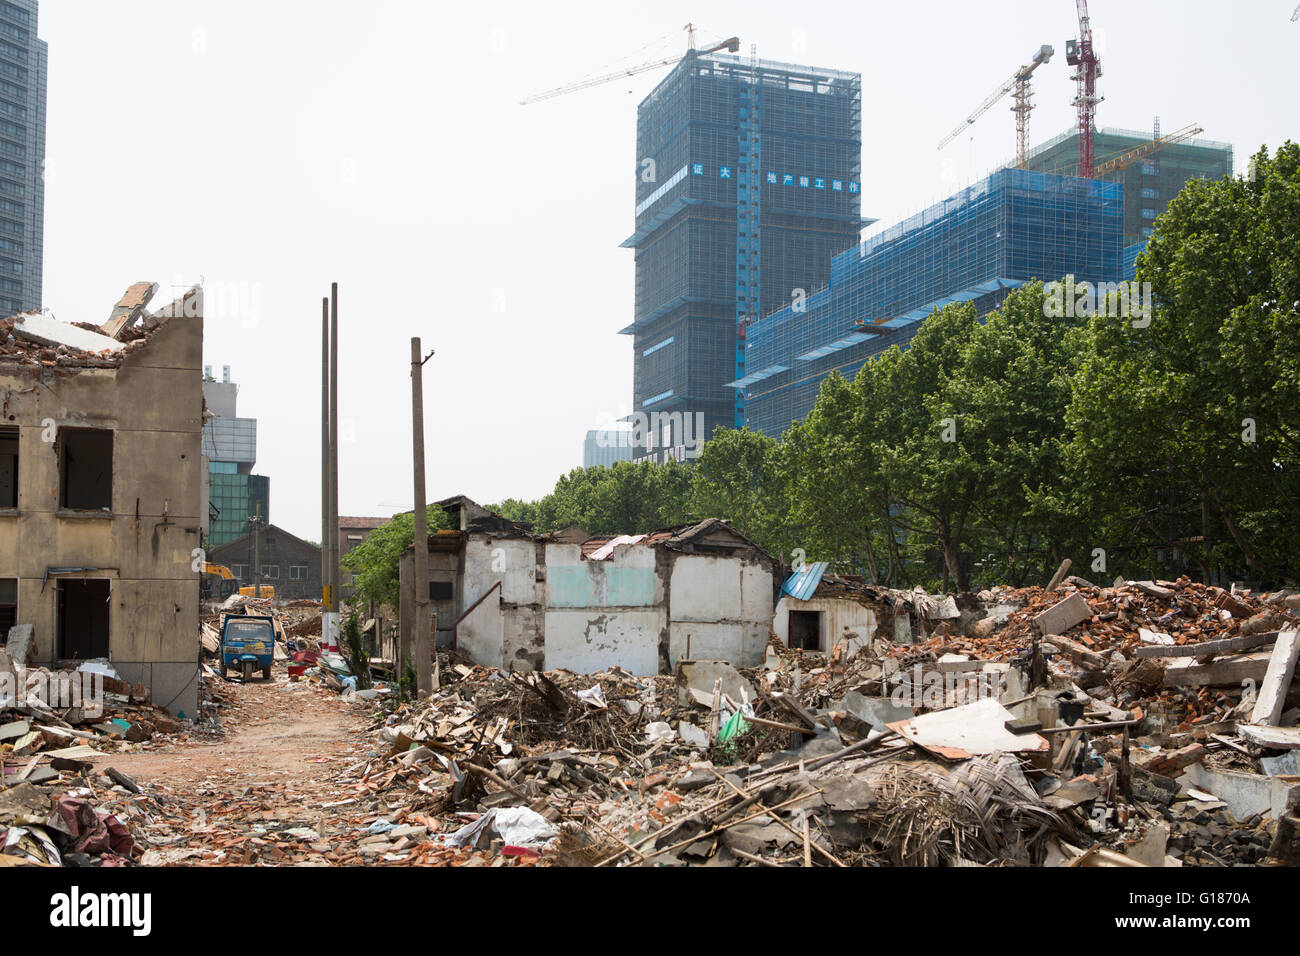 Demolished Chinese houses with debris on the ground, for new building urbanization activity, new construction with cranes background Stock Photo